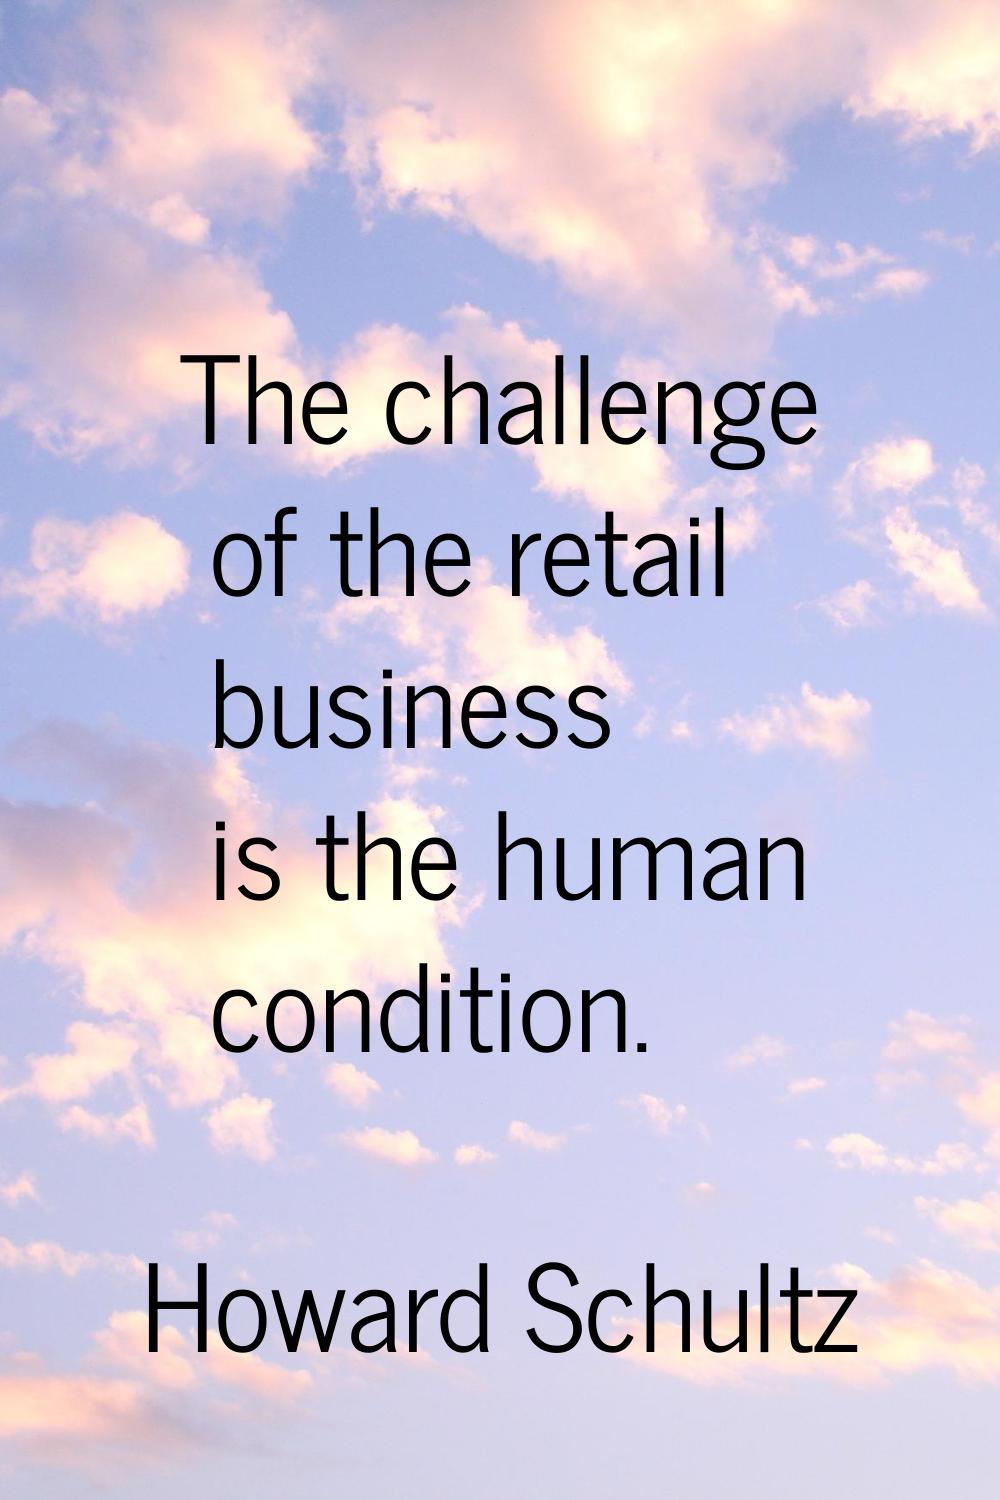 The challenge of the retail business is the human condition.